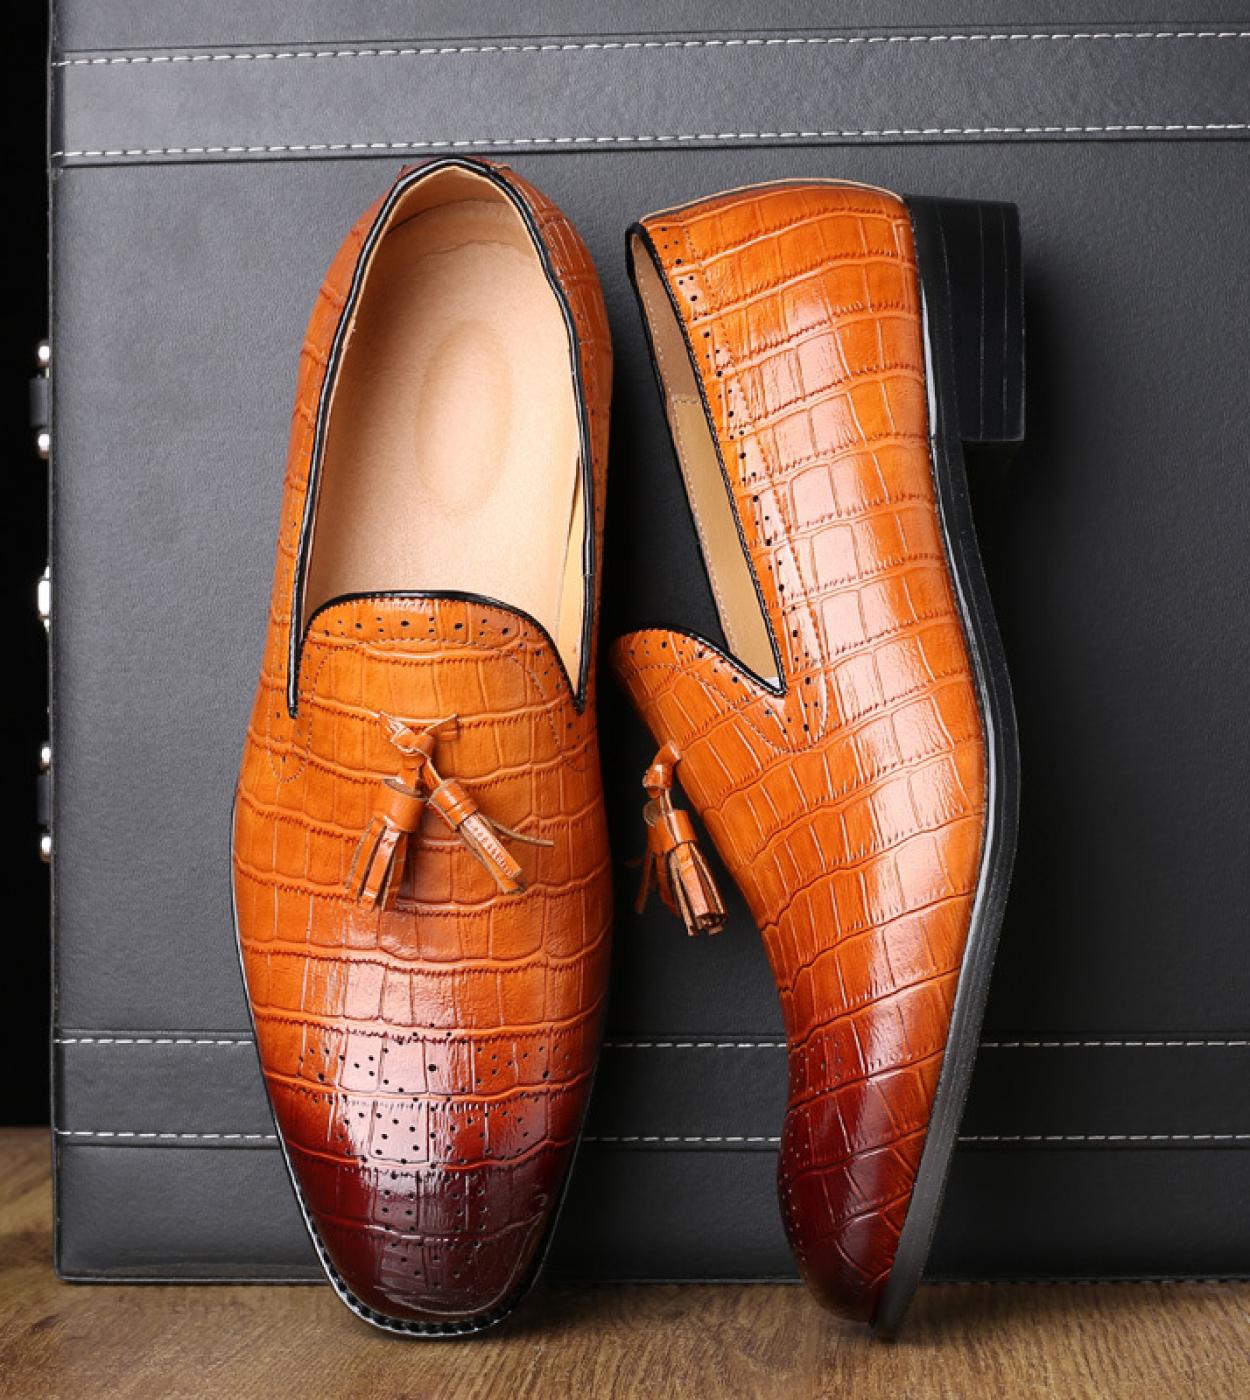 Spring Square Toe Mens Business Dress Shoes Cover Foot Fringed Brooch Carved Leather Man Slip On Fashion Wedding Brogue